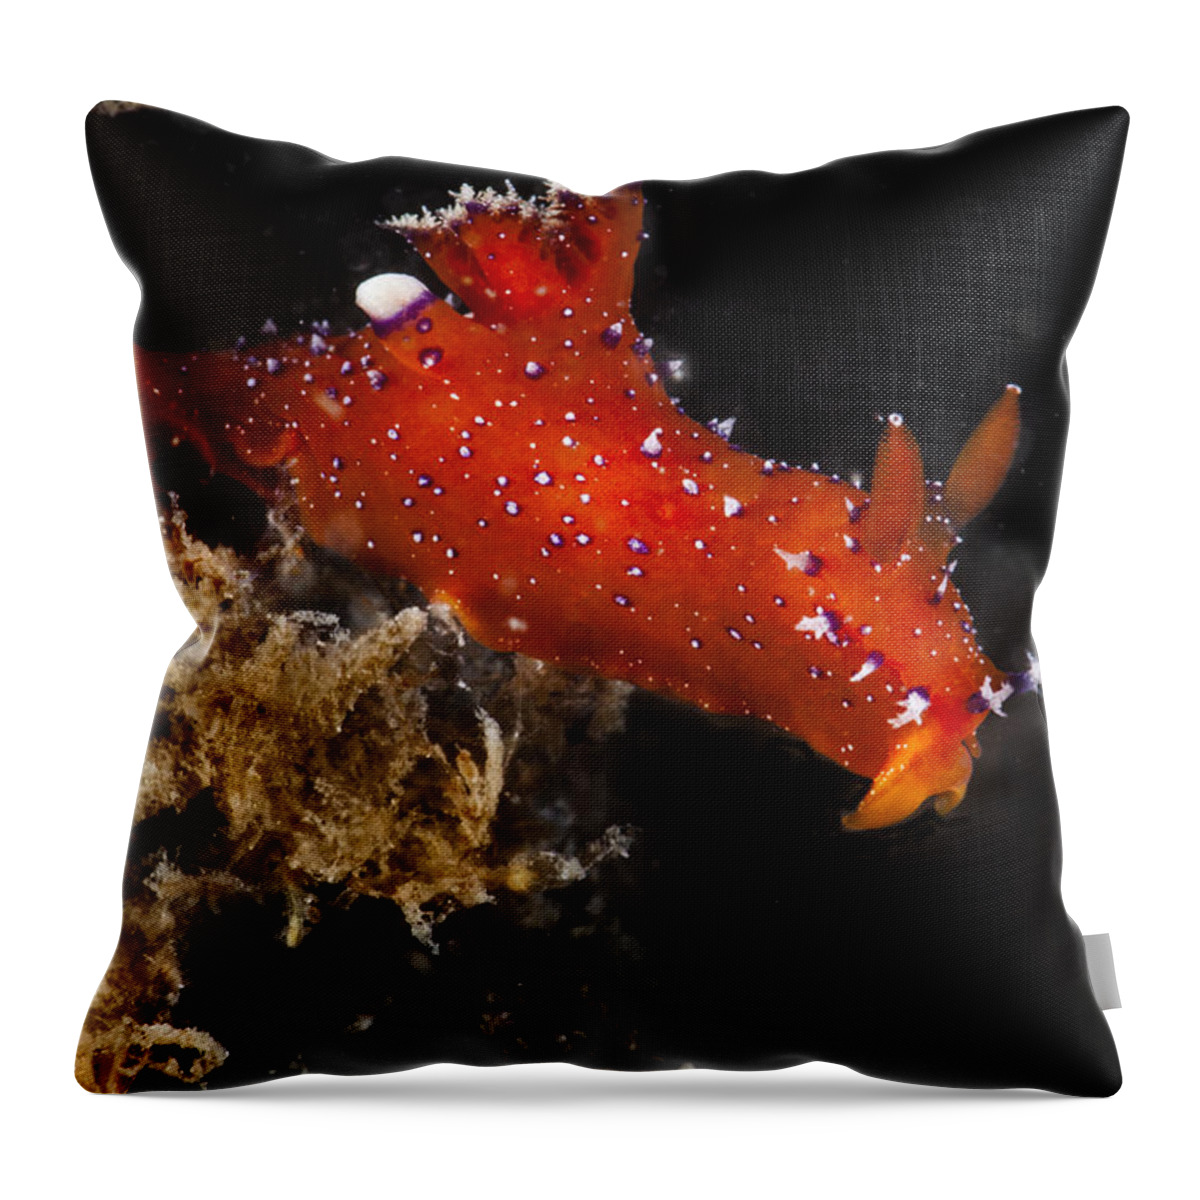 Plocamopherus Throw Pillow featuring the photograph Red and Purple by Sandra Edwards